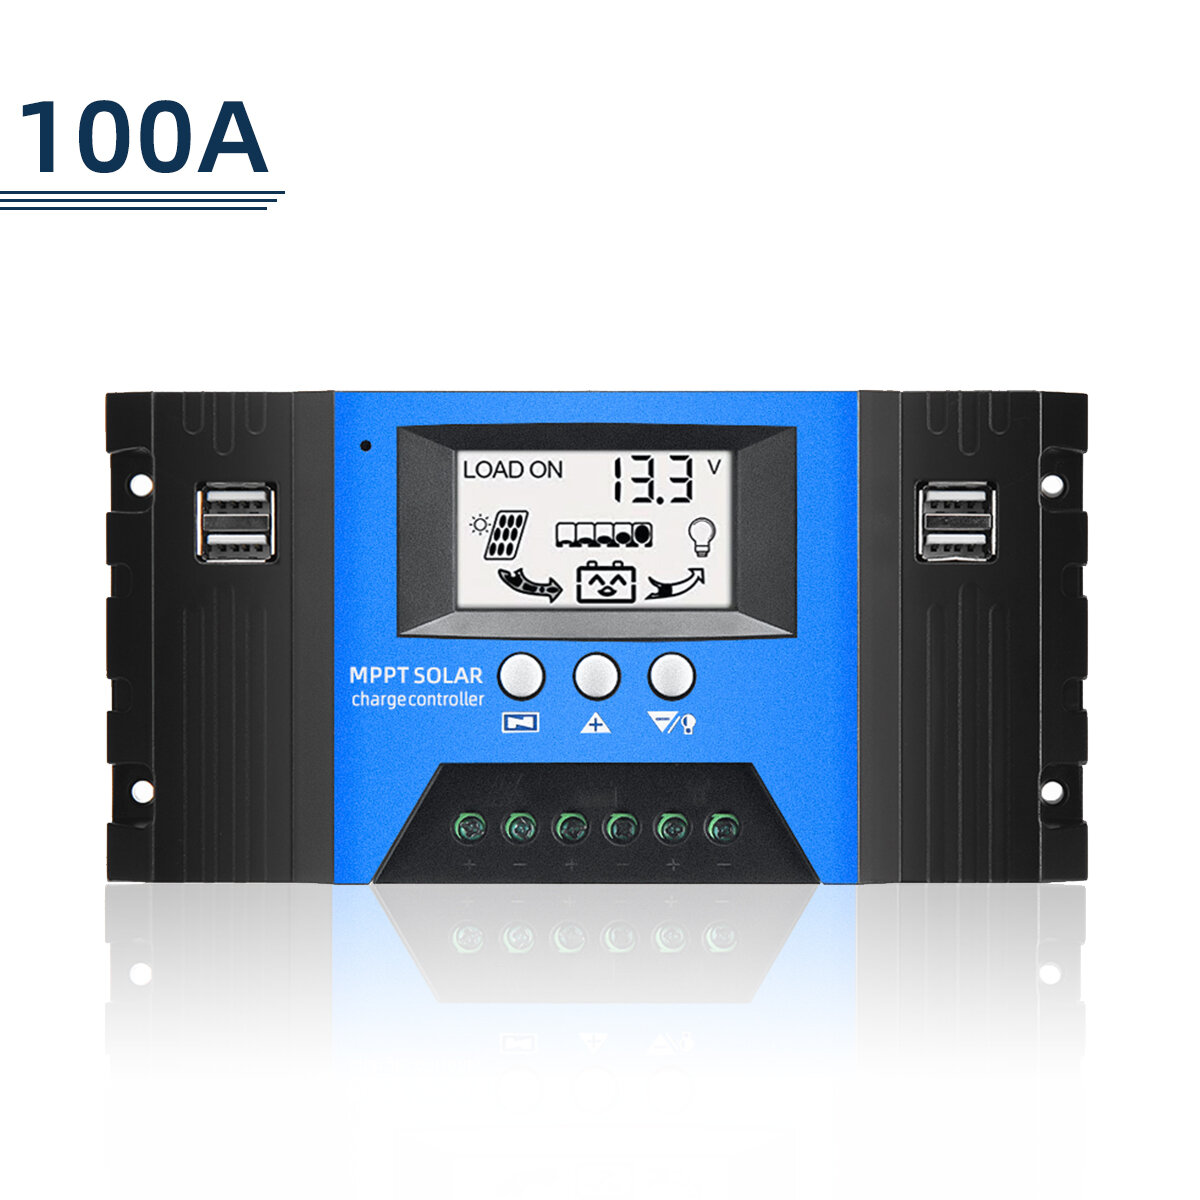 best price,excellway,100a,mppt,solar,controller,discount